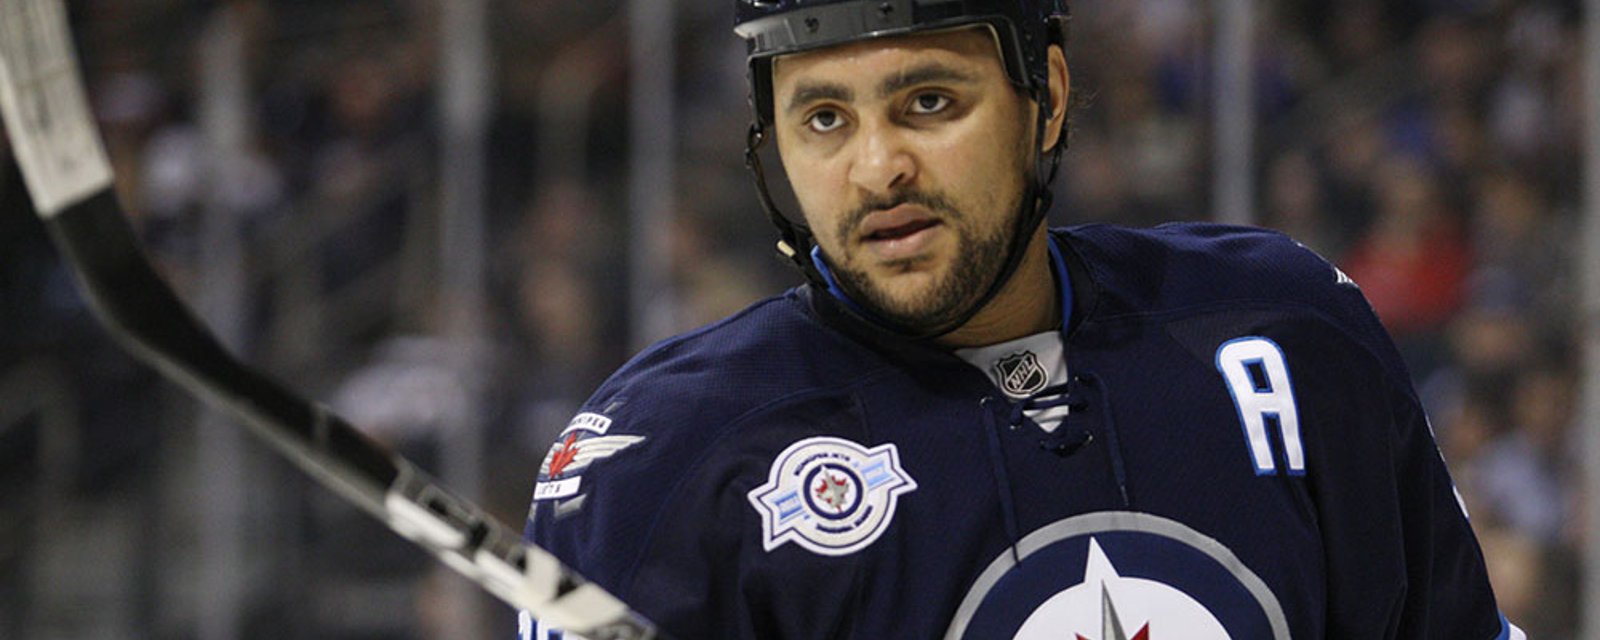 Where it all went wrong between Byfuglien and the Jets